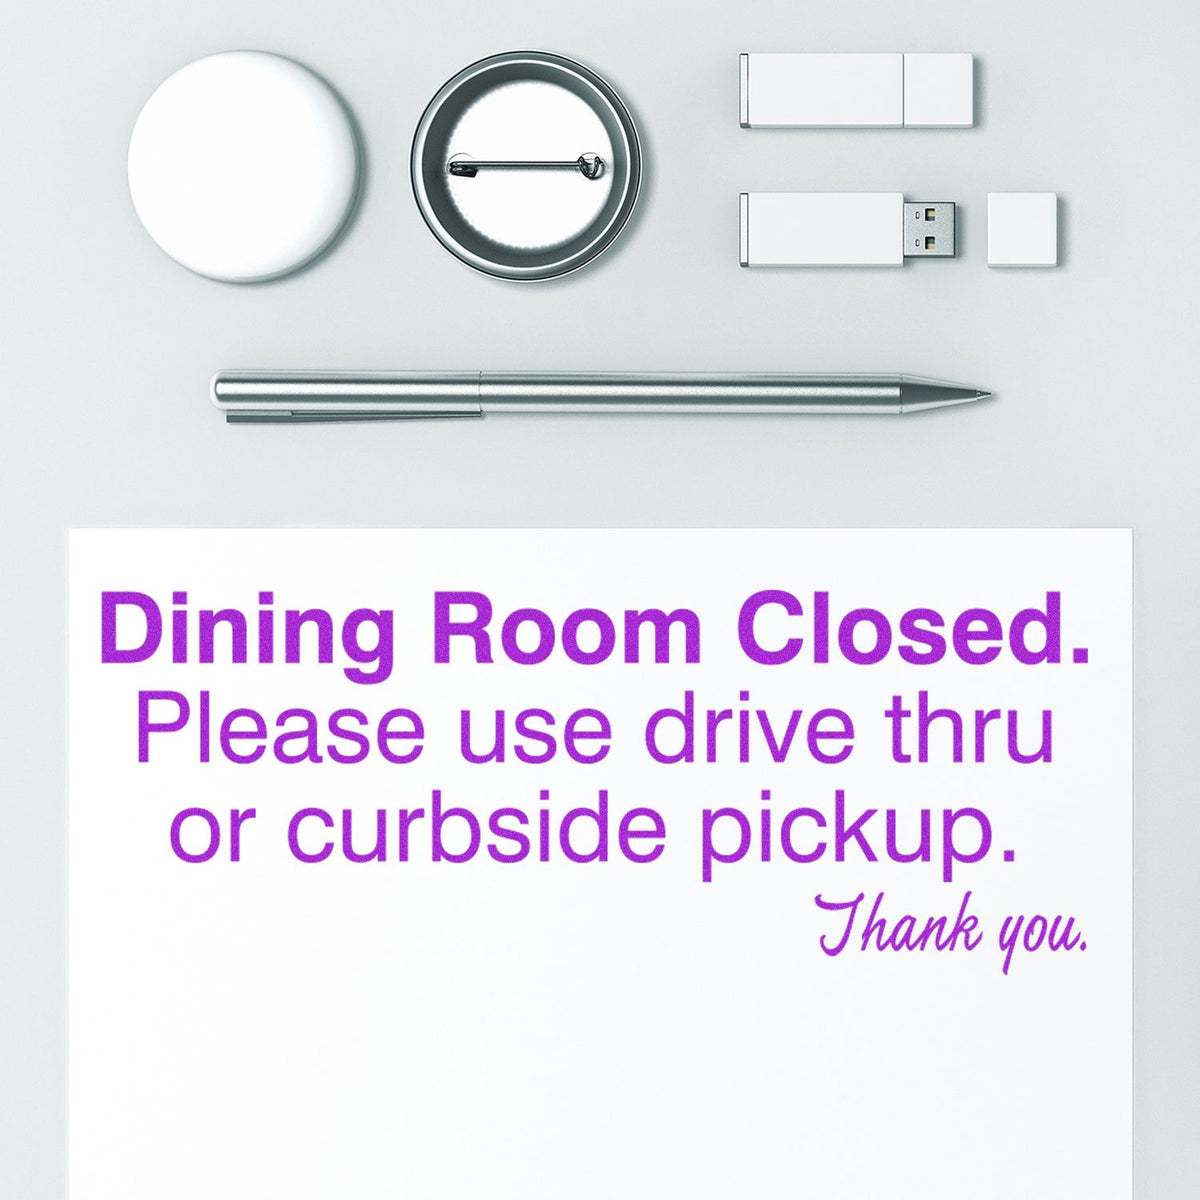 Dining Room Closed Rubber Stamp In Use